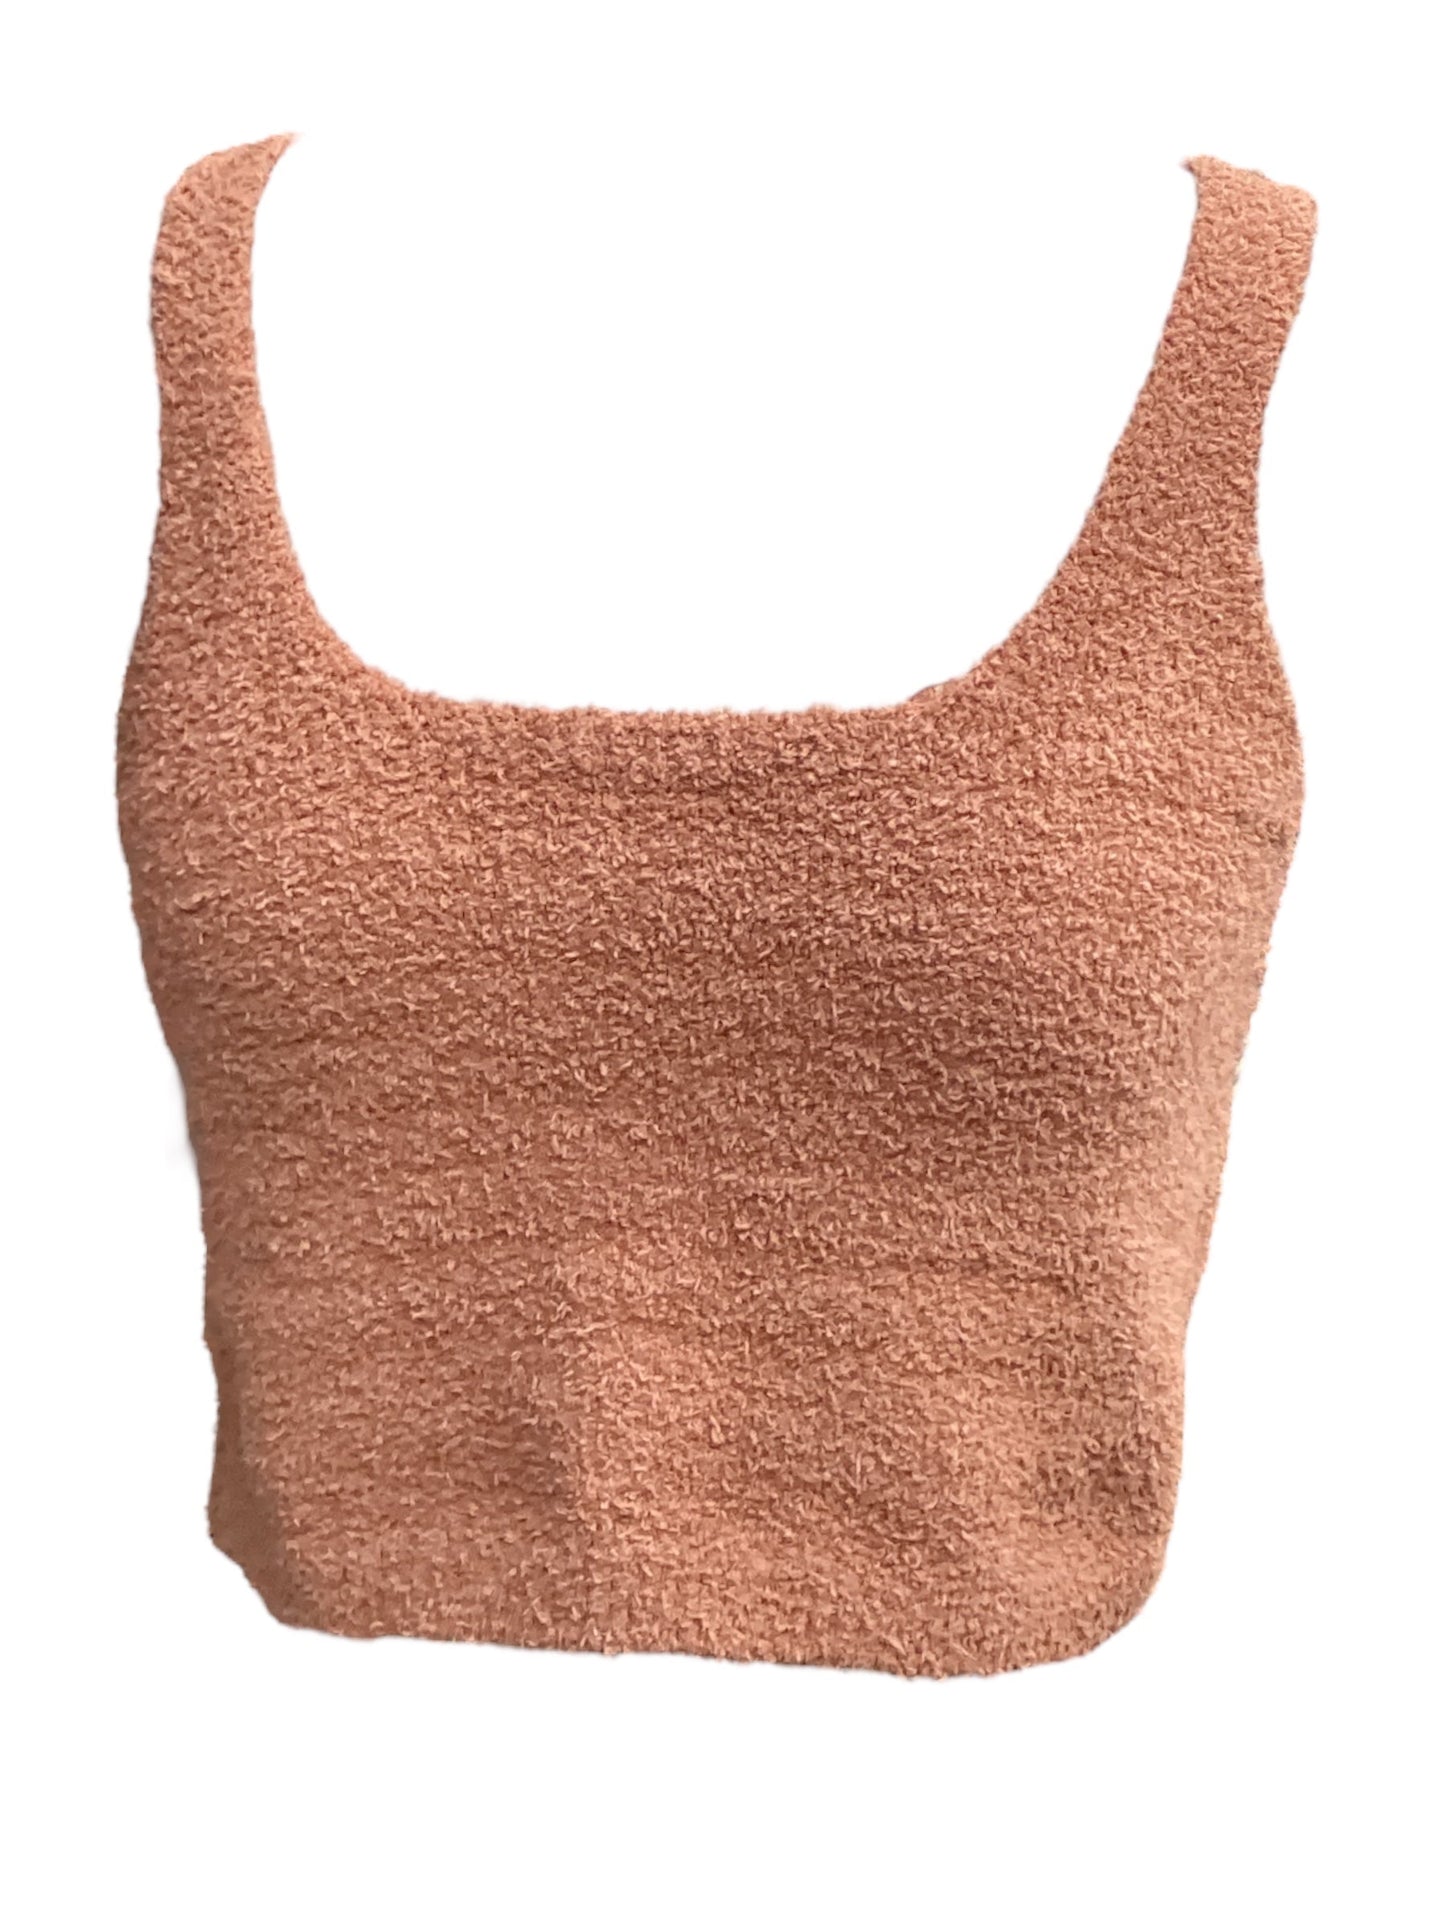 Rose Gold Tank Top Clothes Mentor, Size 2x